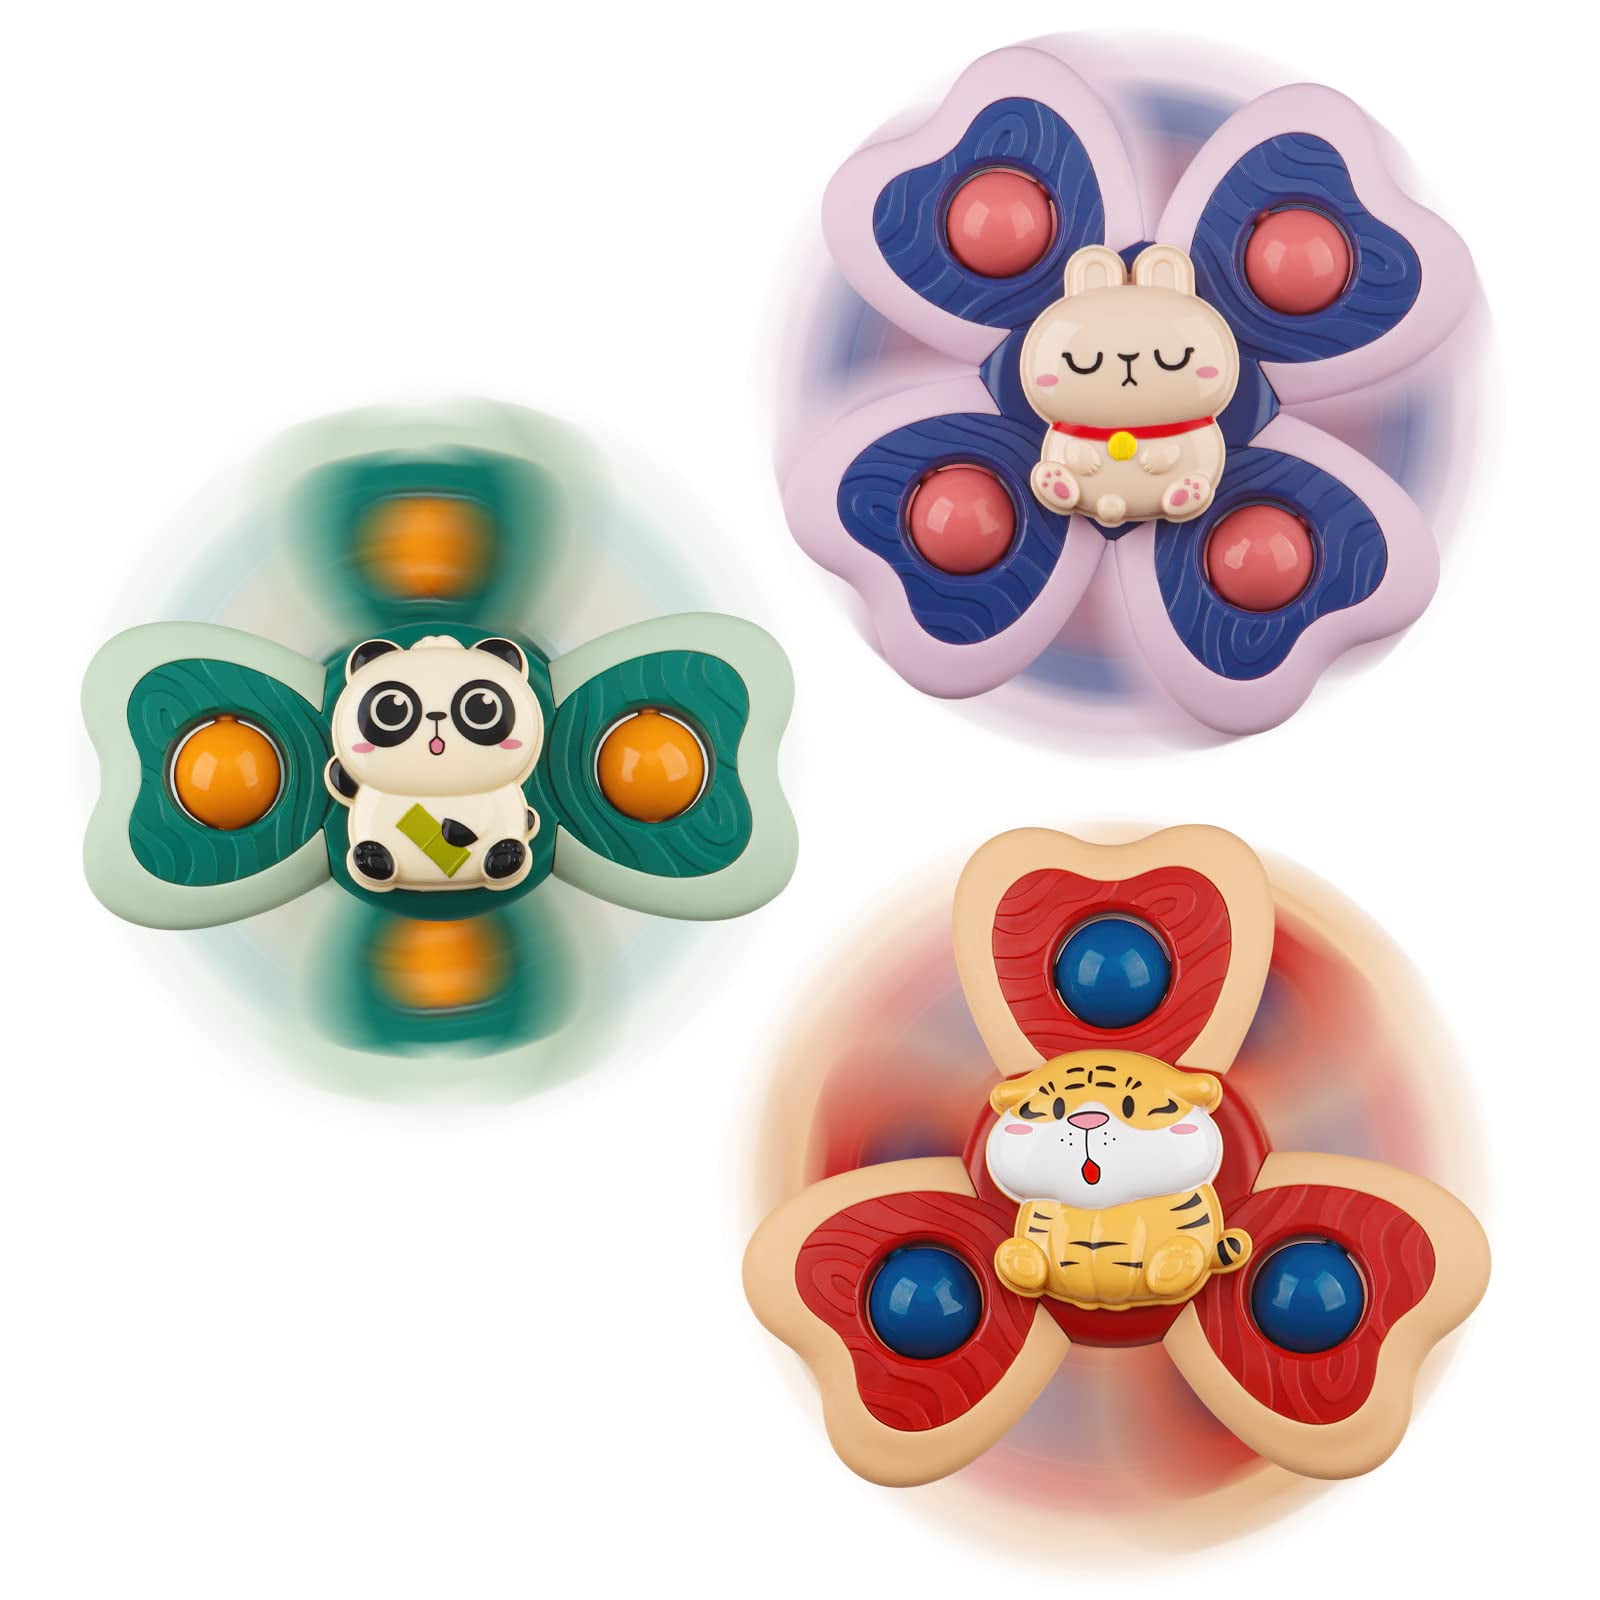 Suction Cup Spinner Toys - Baby Montessori Sensory Educational